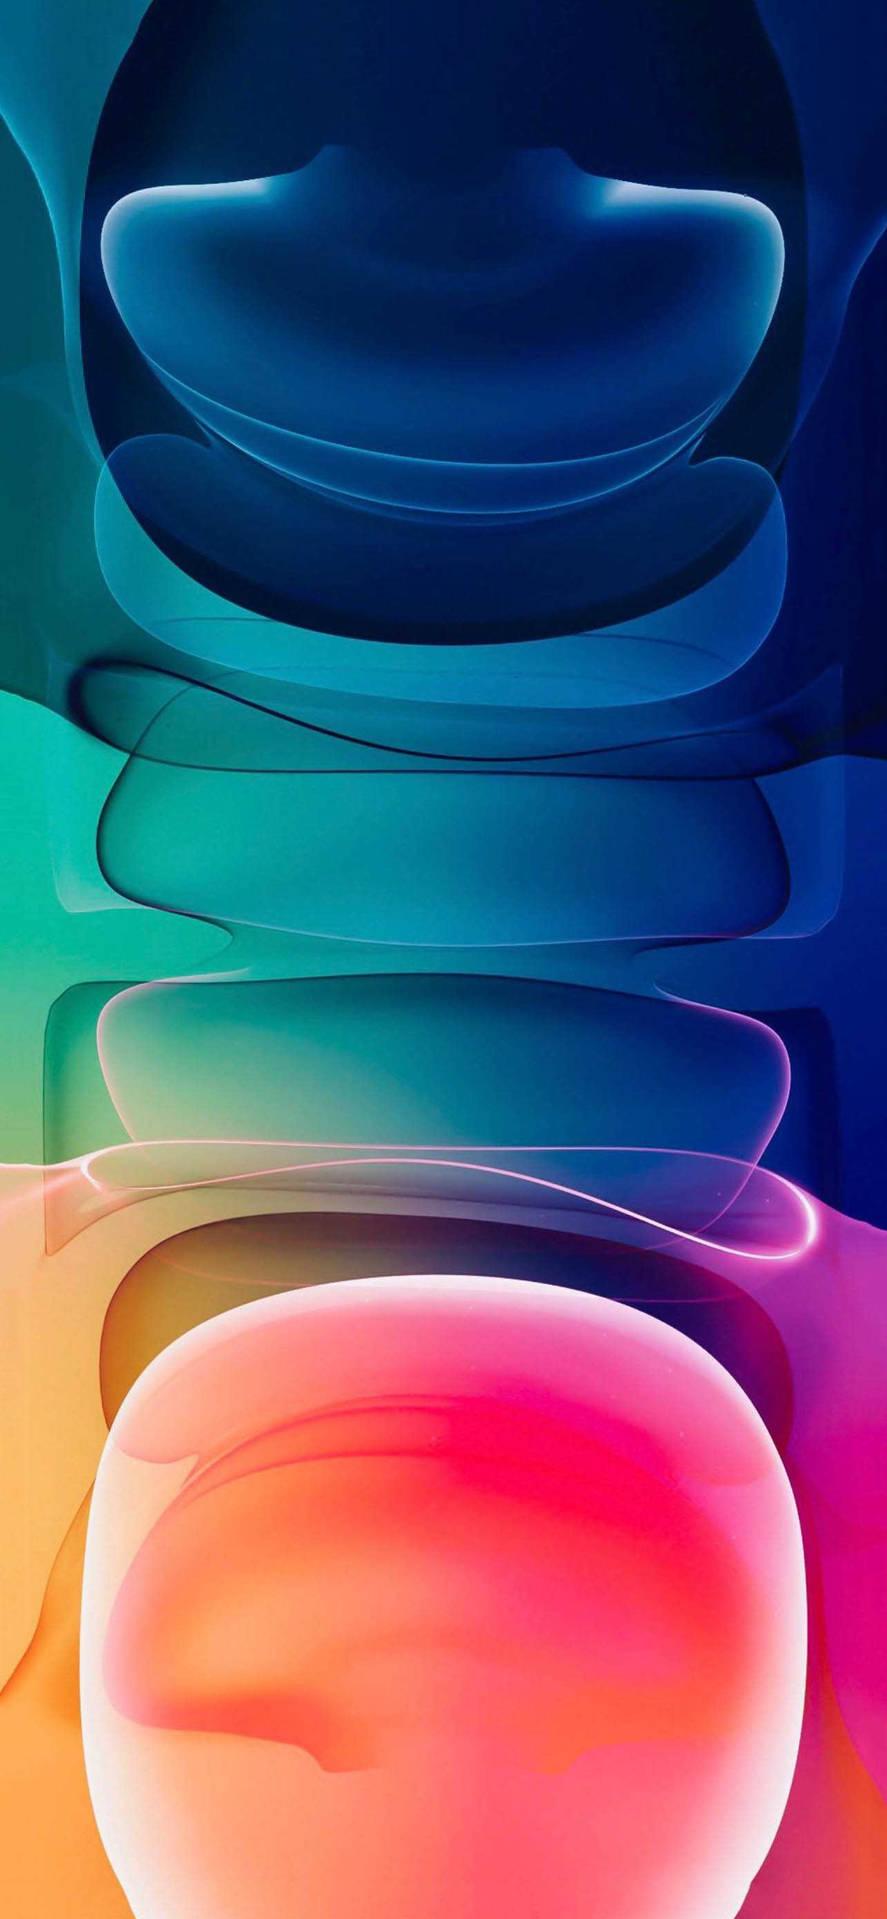 Download Ios 15 Abstract Spheres Wallpaper